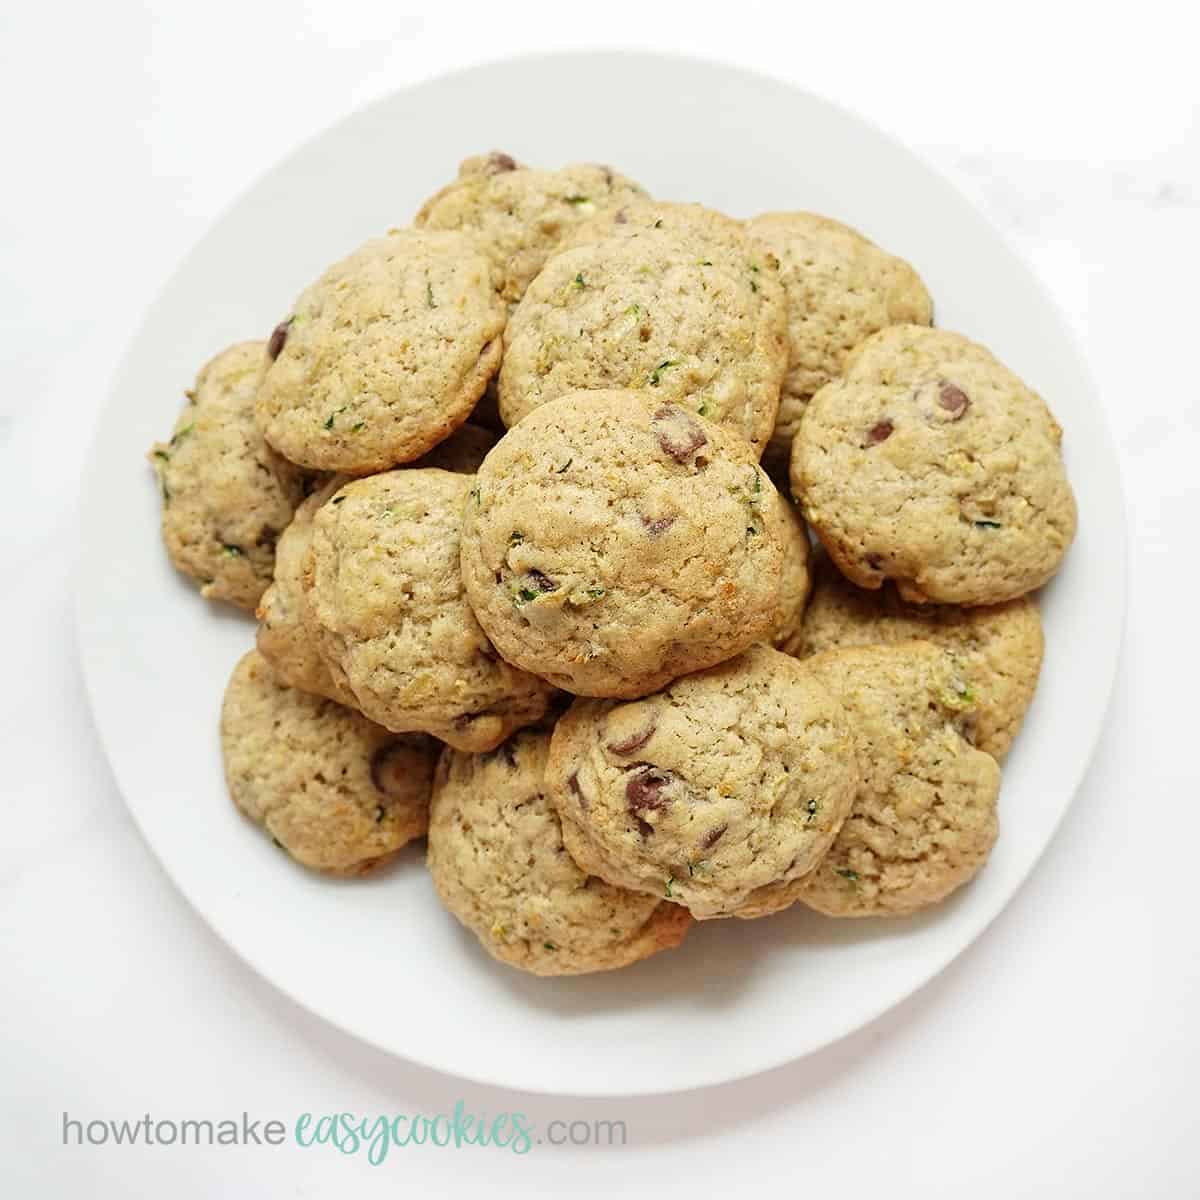 zucchini chocolate chip cookies piled on a white plate